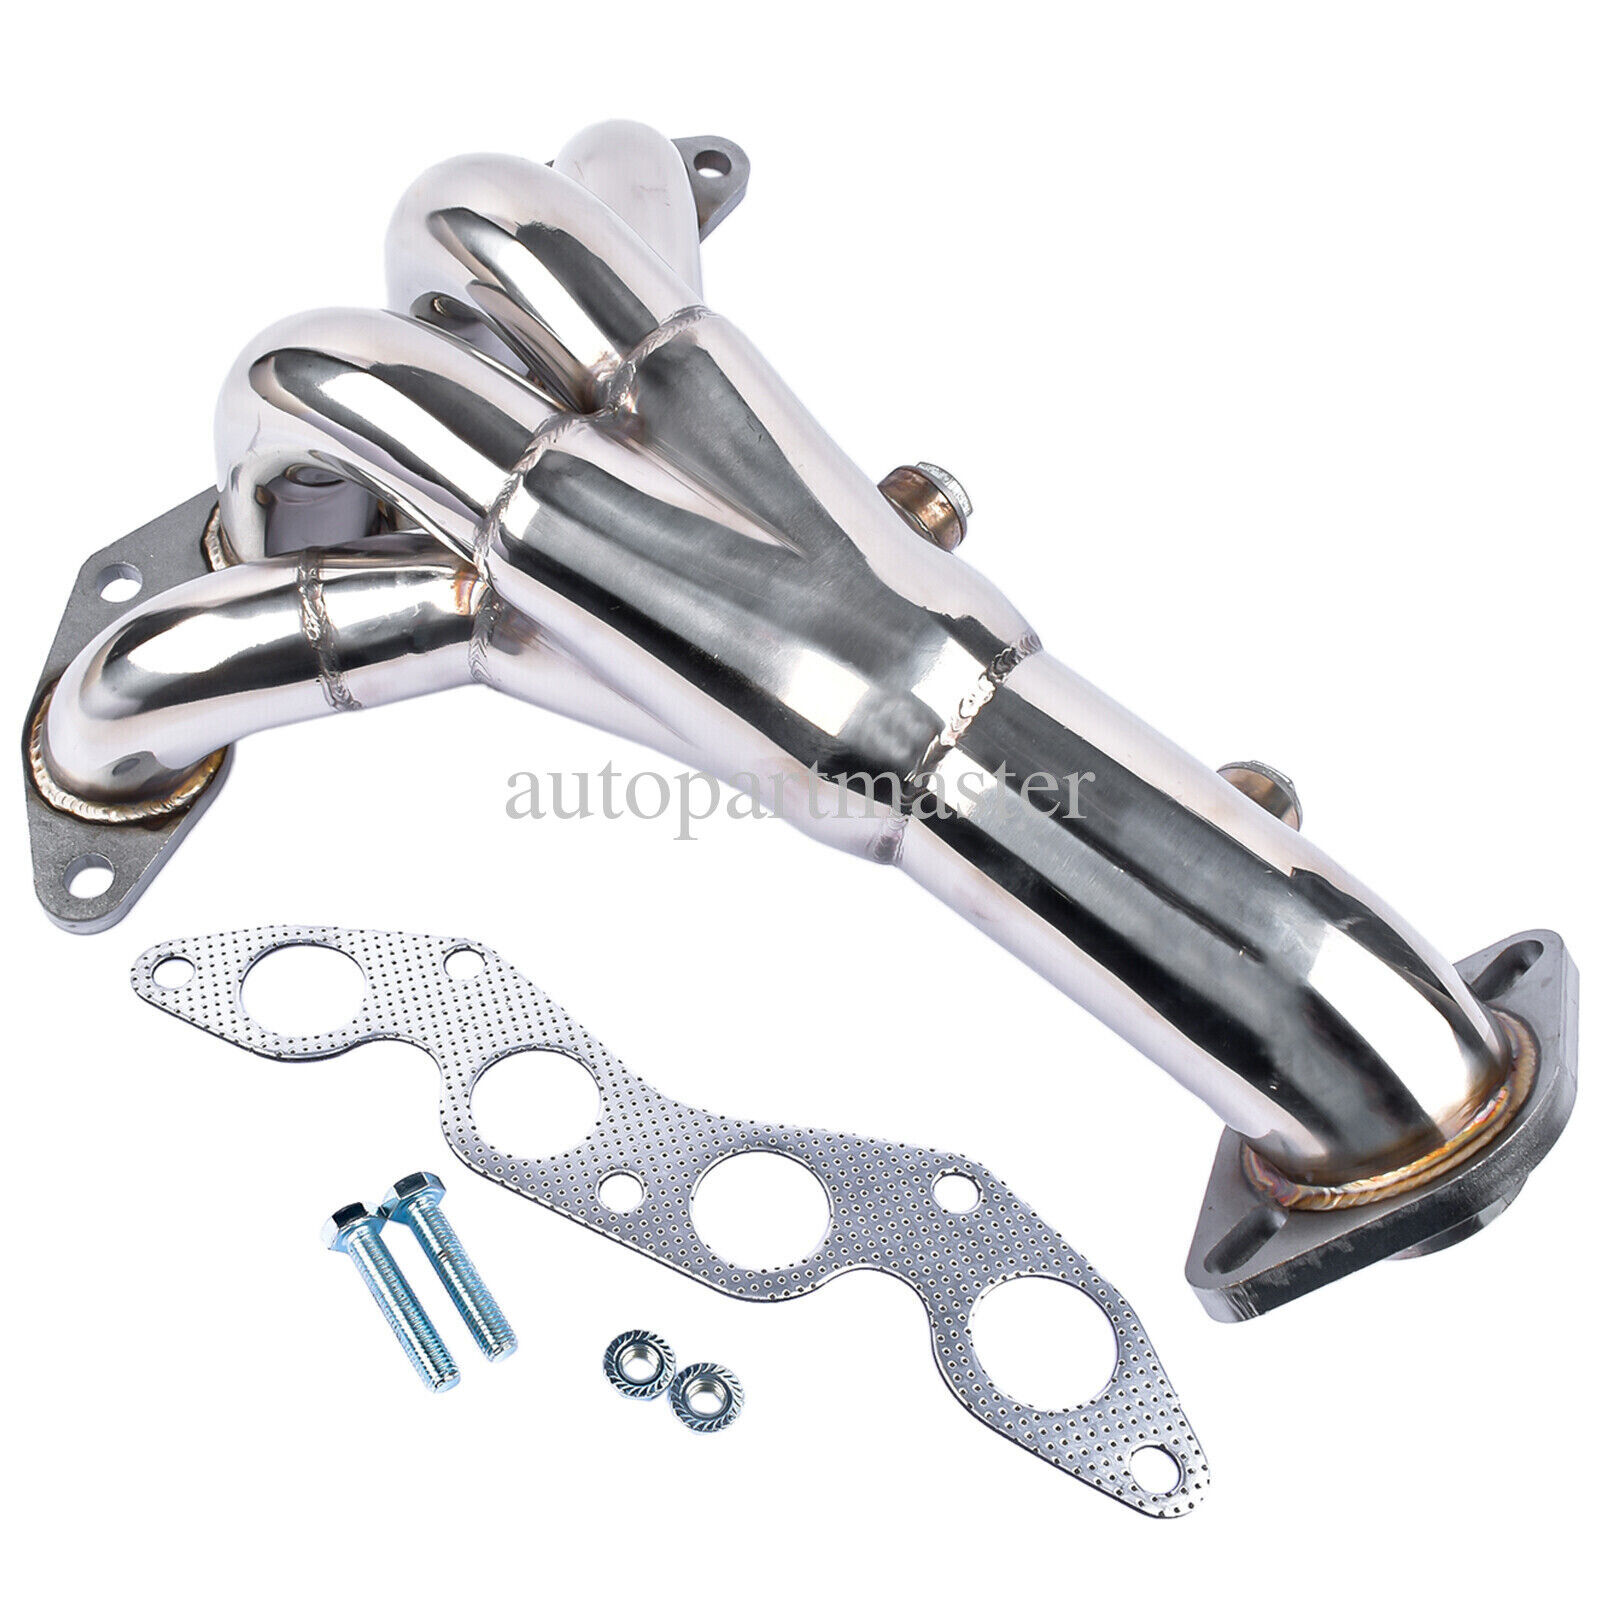 NEW Exhaust Manifold Header Stainless for Honda Civic Dx/Lx 2001-2005